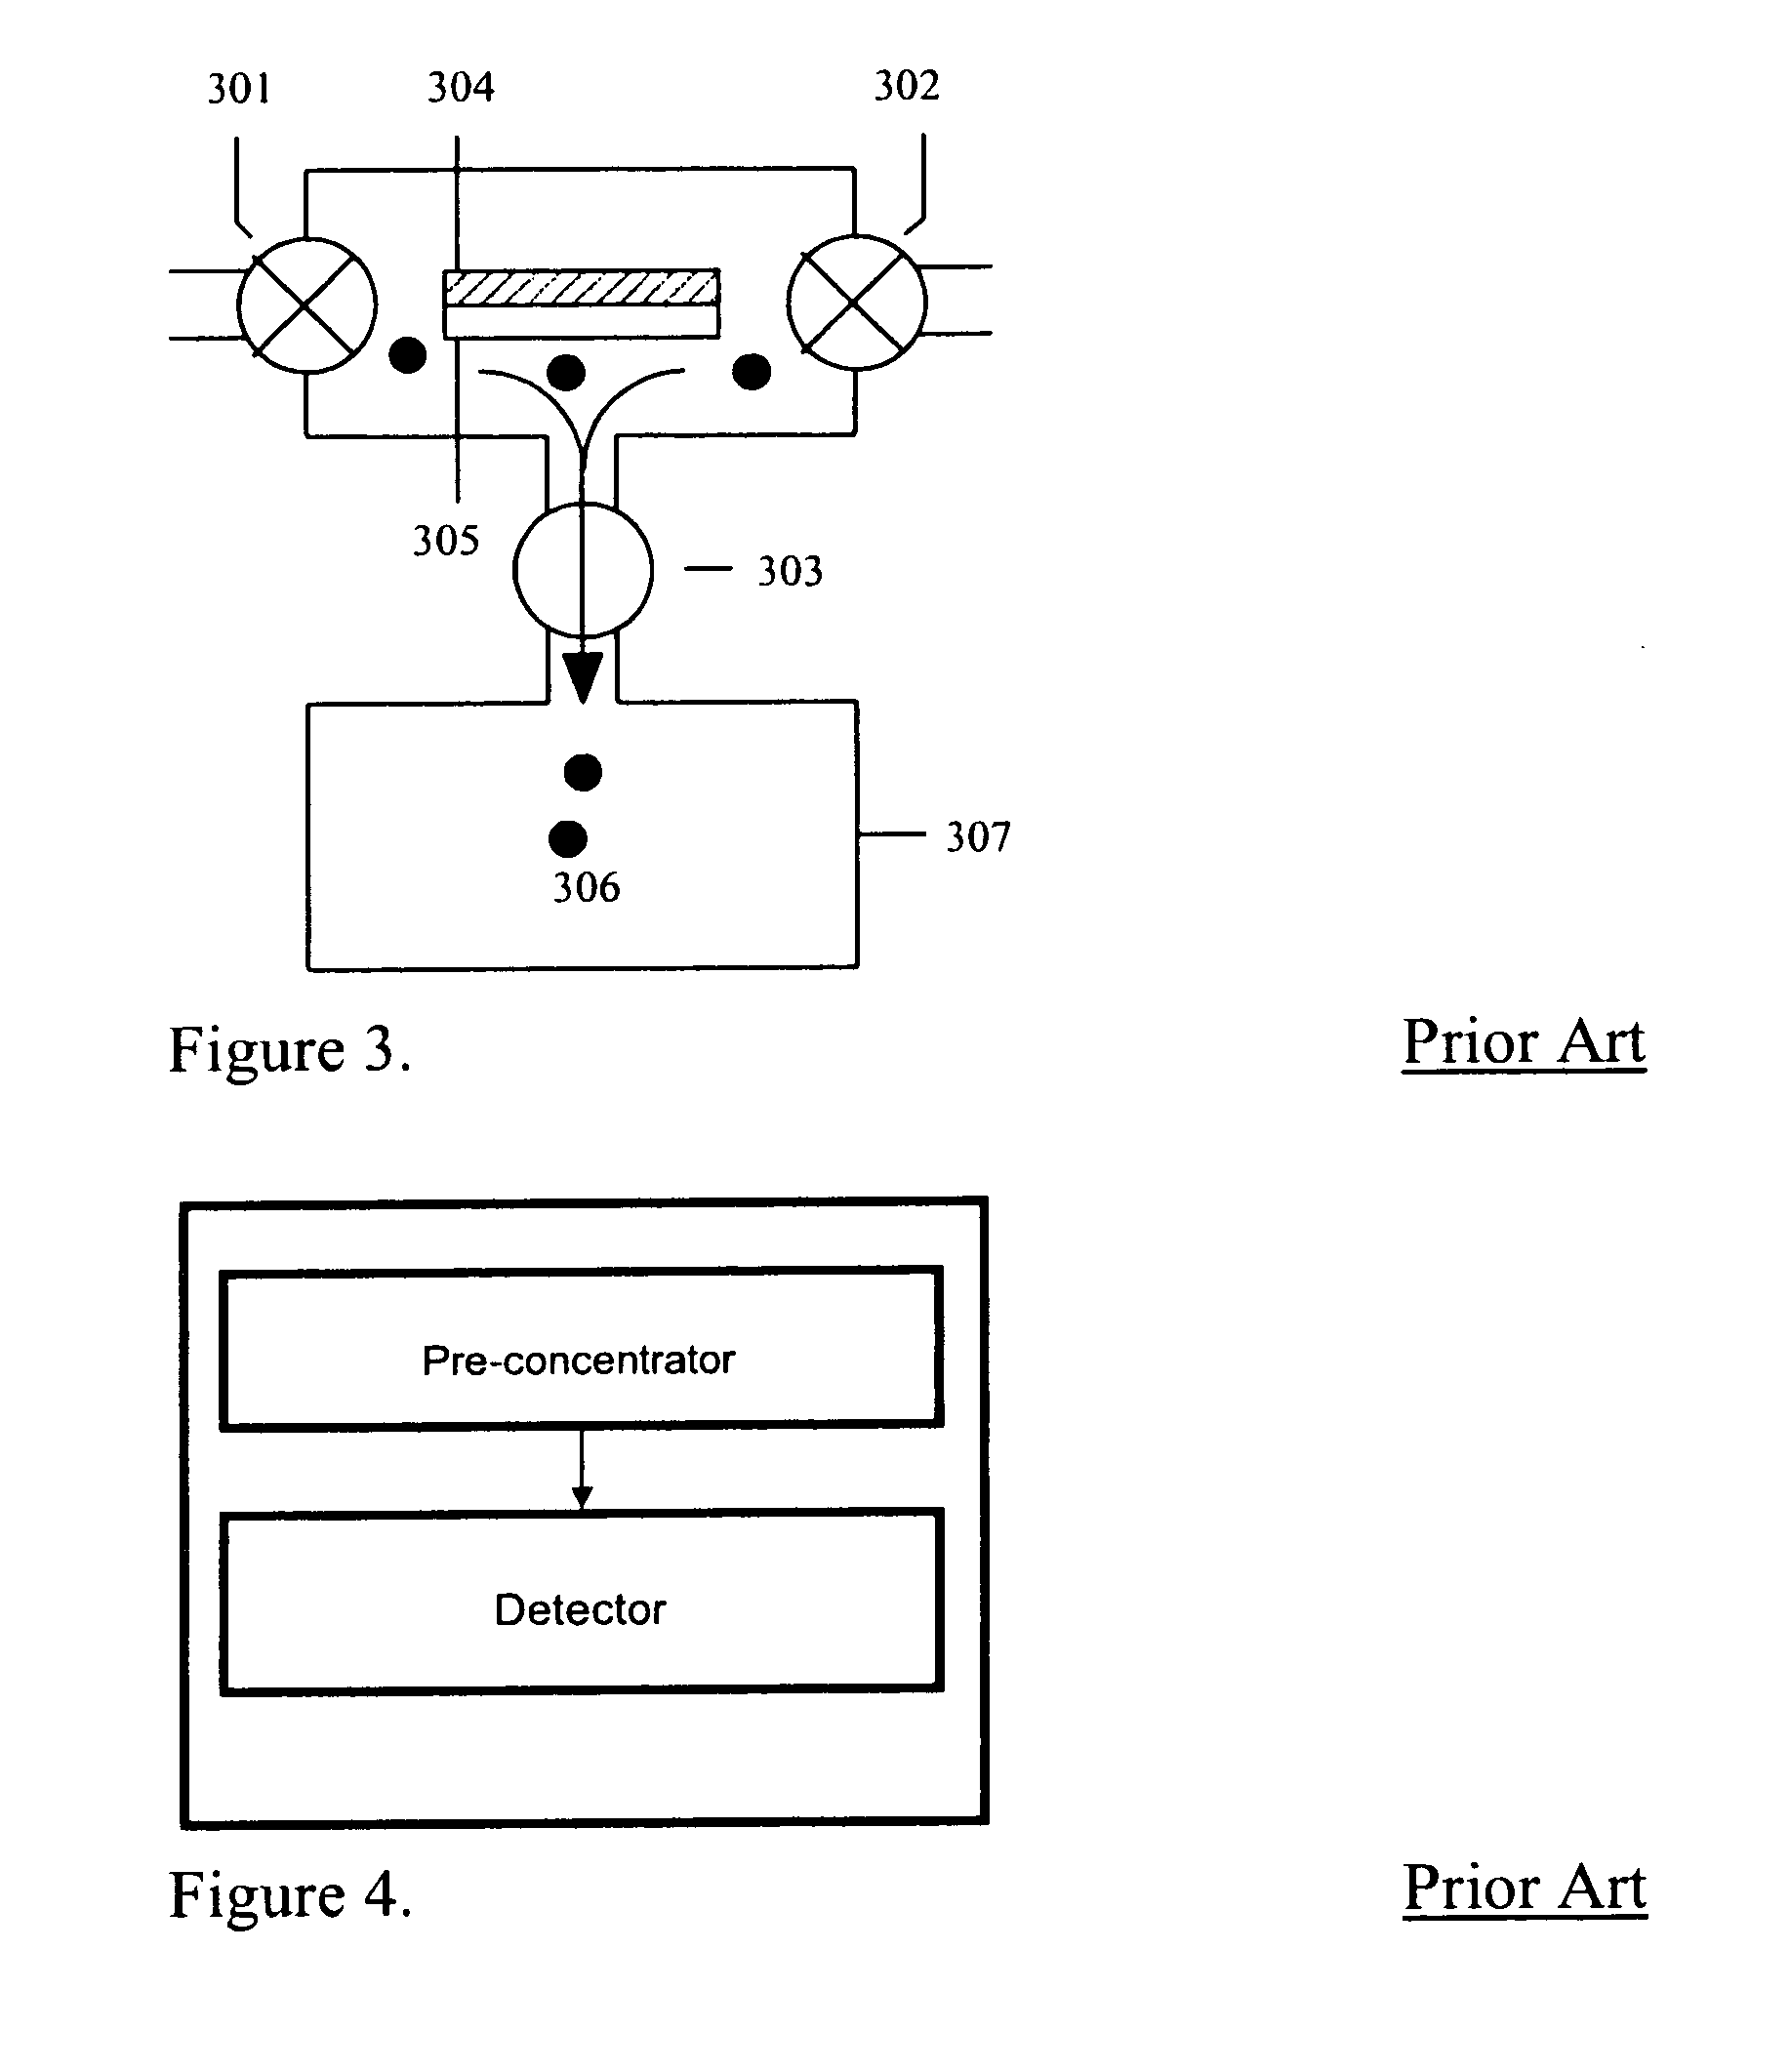 Pre-concentrator and sample interface